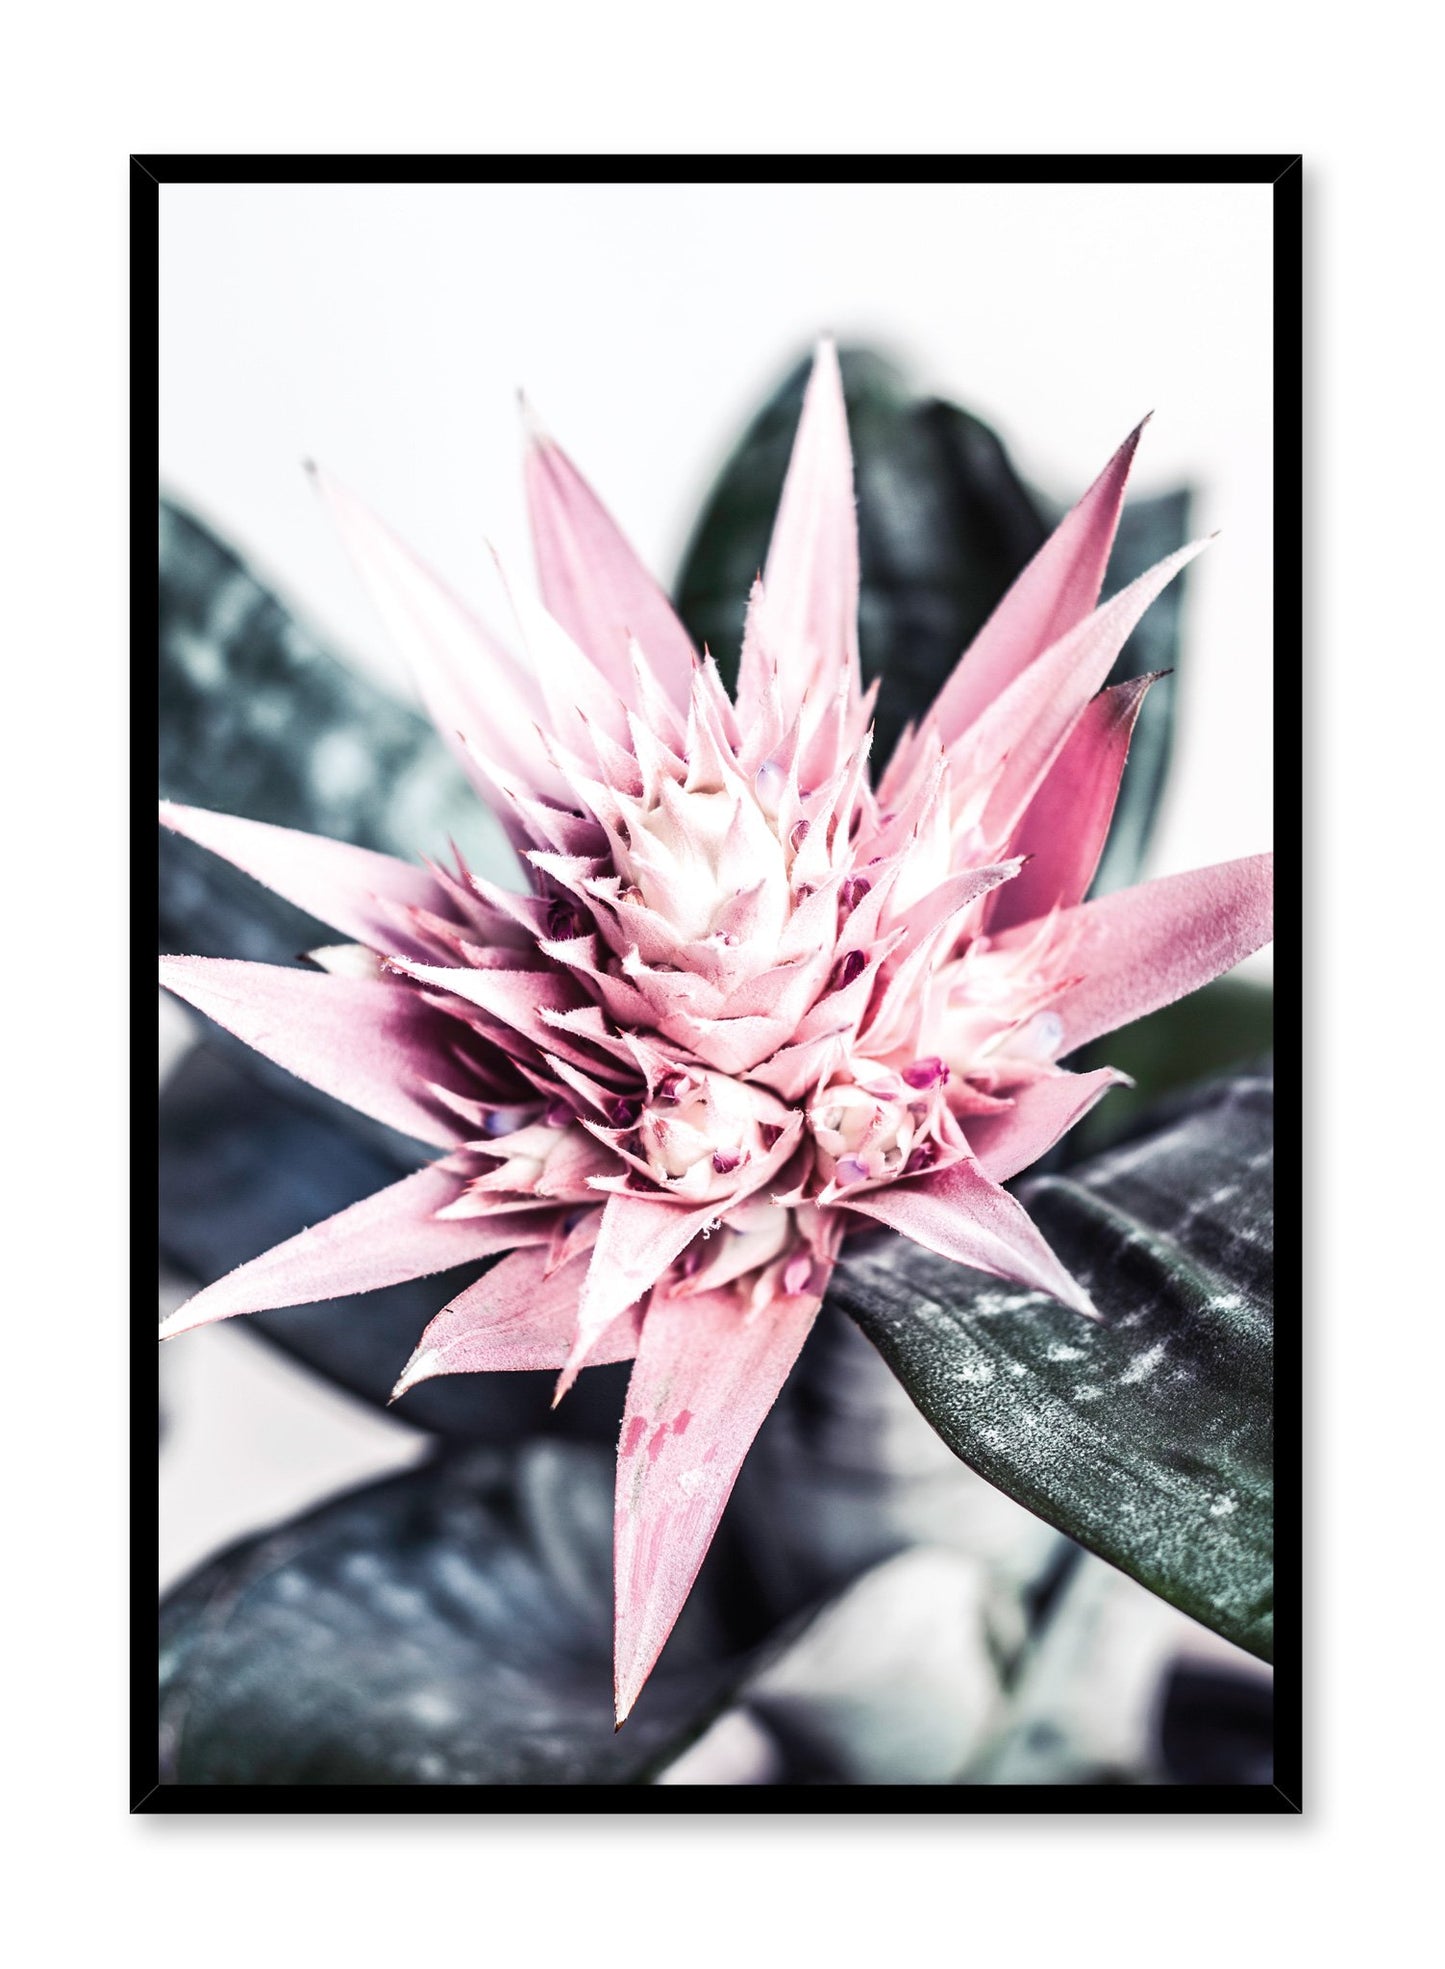 Modern minimalist poster by Opposite Wall with trendy Desert cactus flower photography